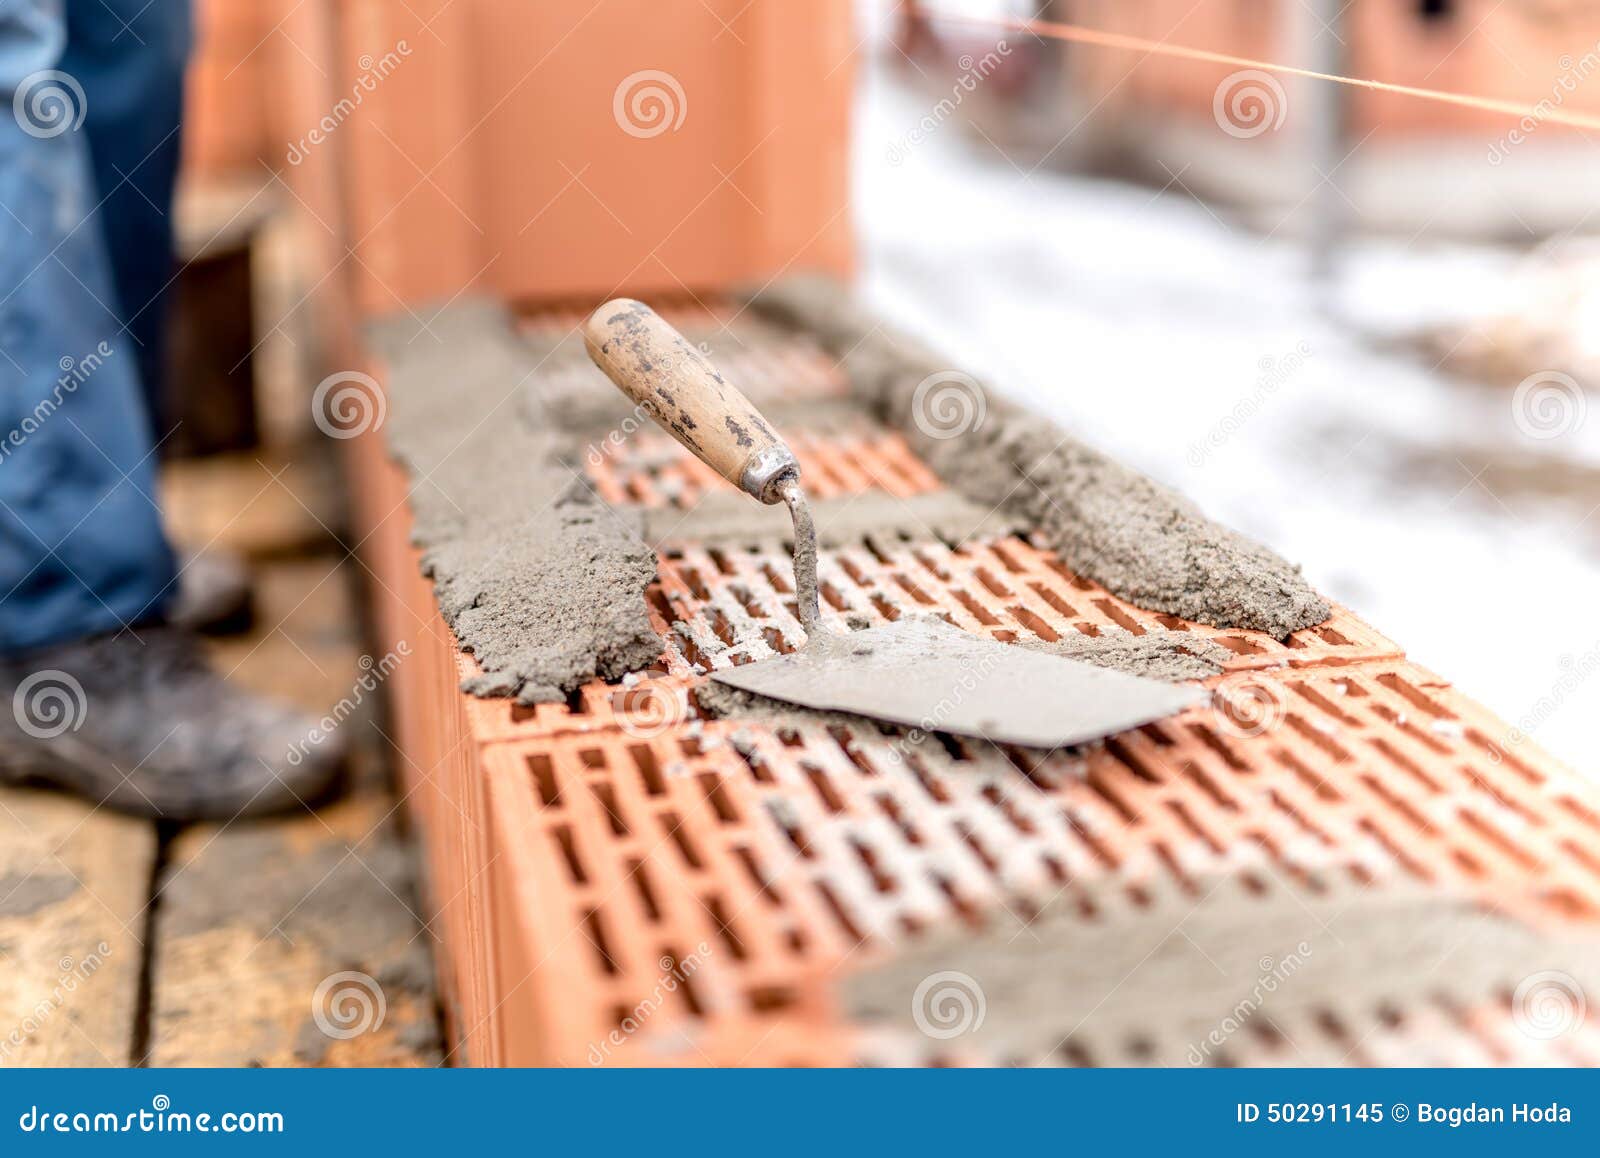 detail of construction site, trowel or putty knife on top of brick layer